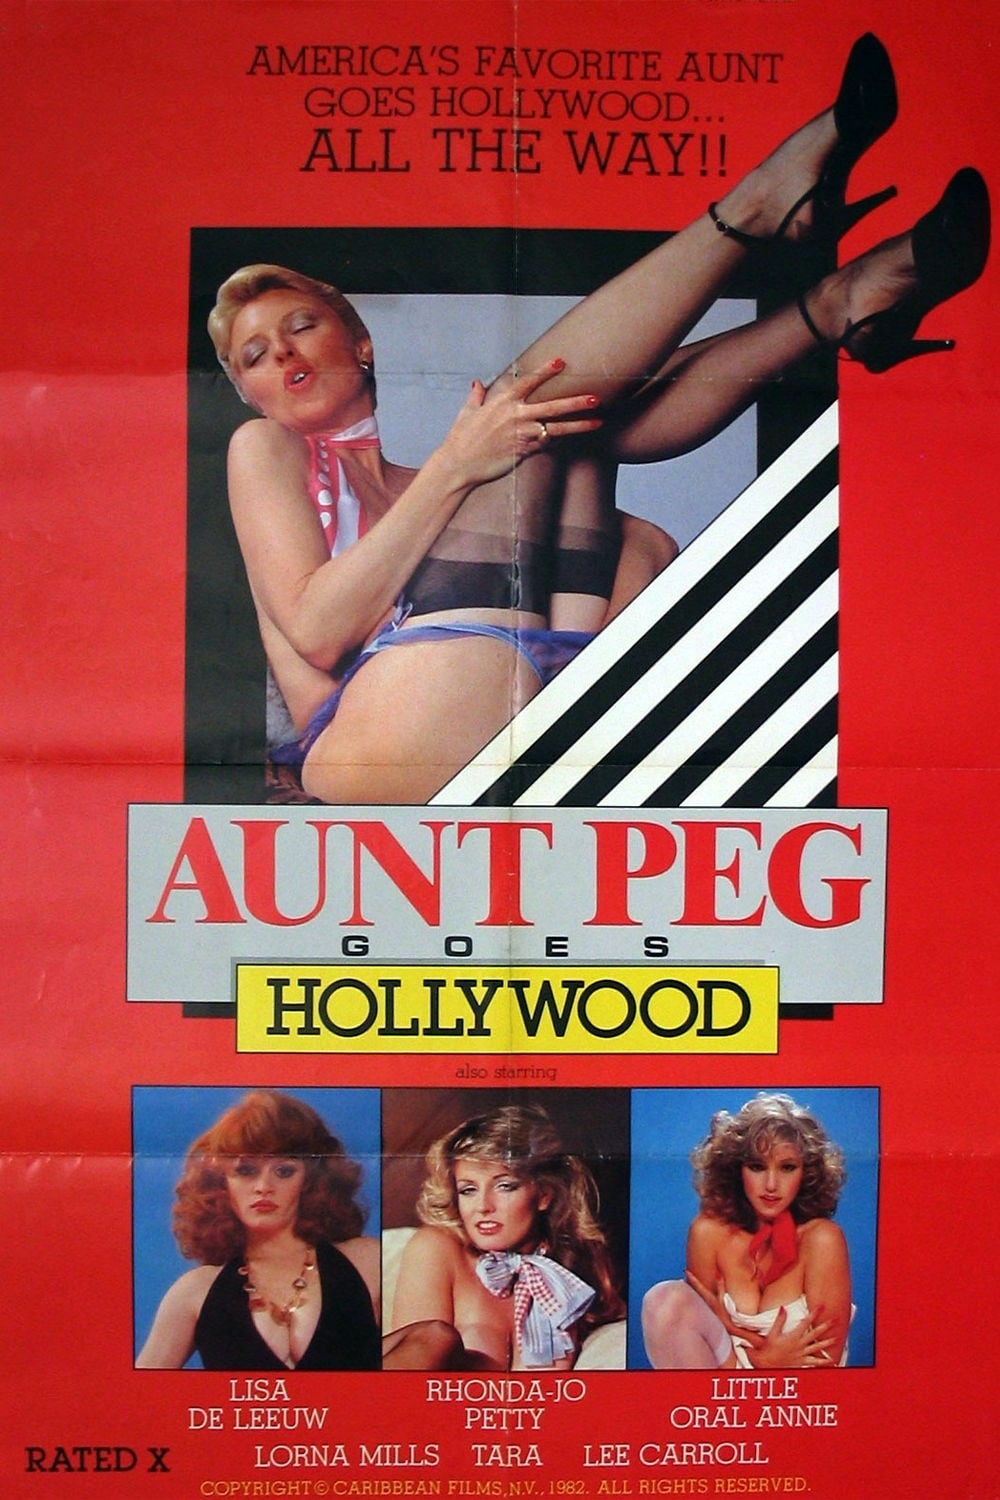 1970s Porn Star Aunt Peg - Watch Aunt Peg Goes Hollywood (1981) Download - Erotic Movies